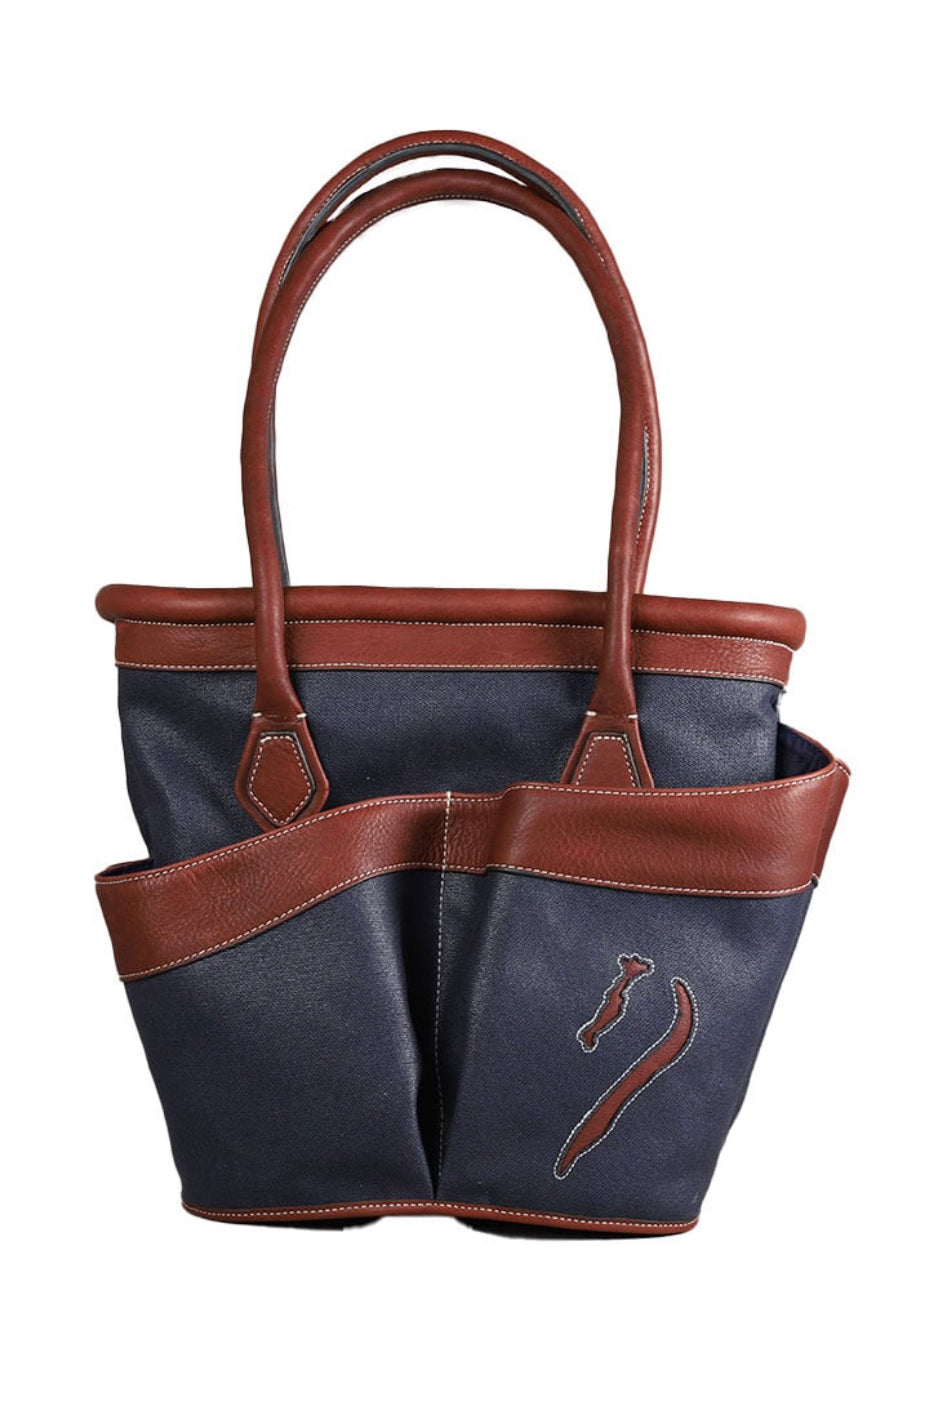 Antarès “Deauville” Grooming Bag